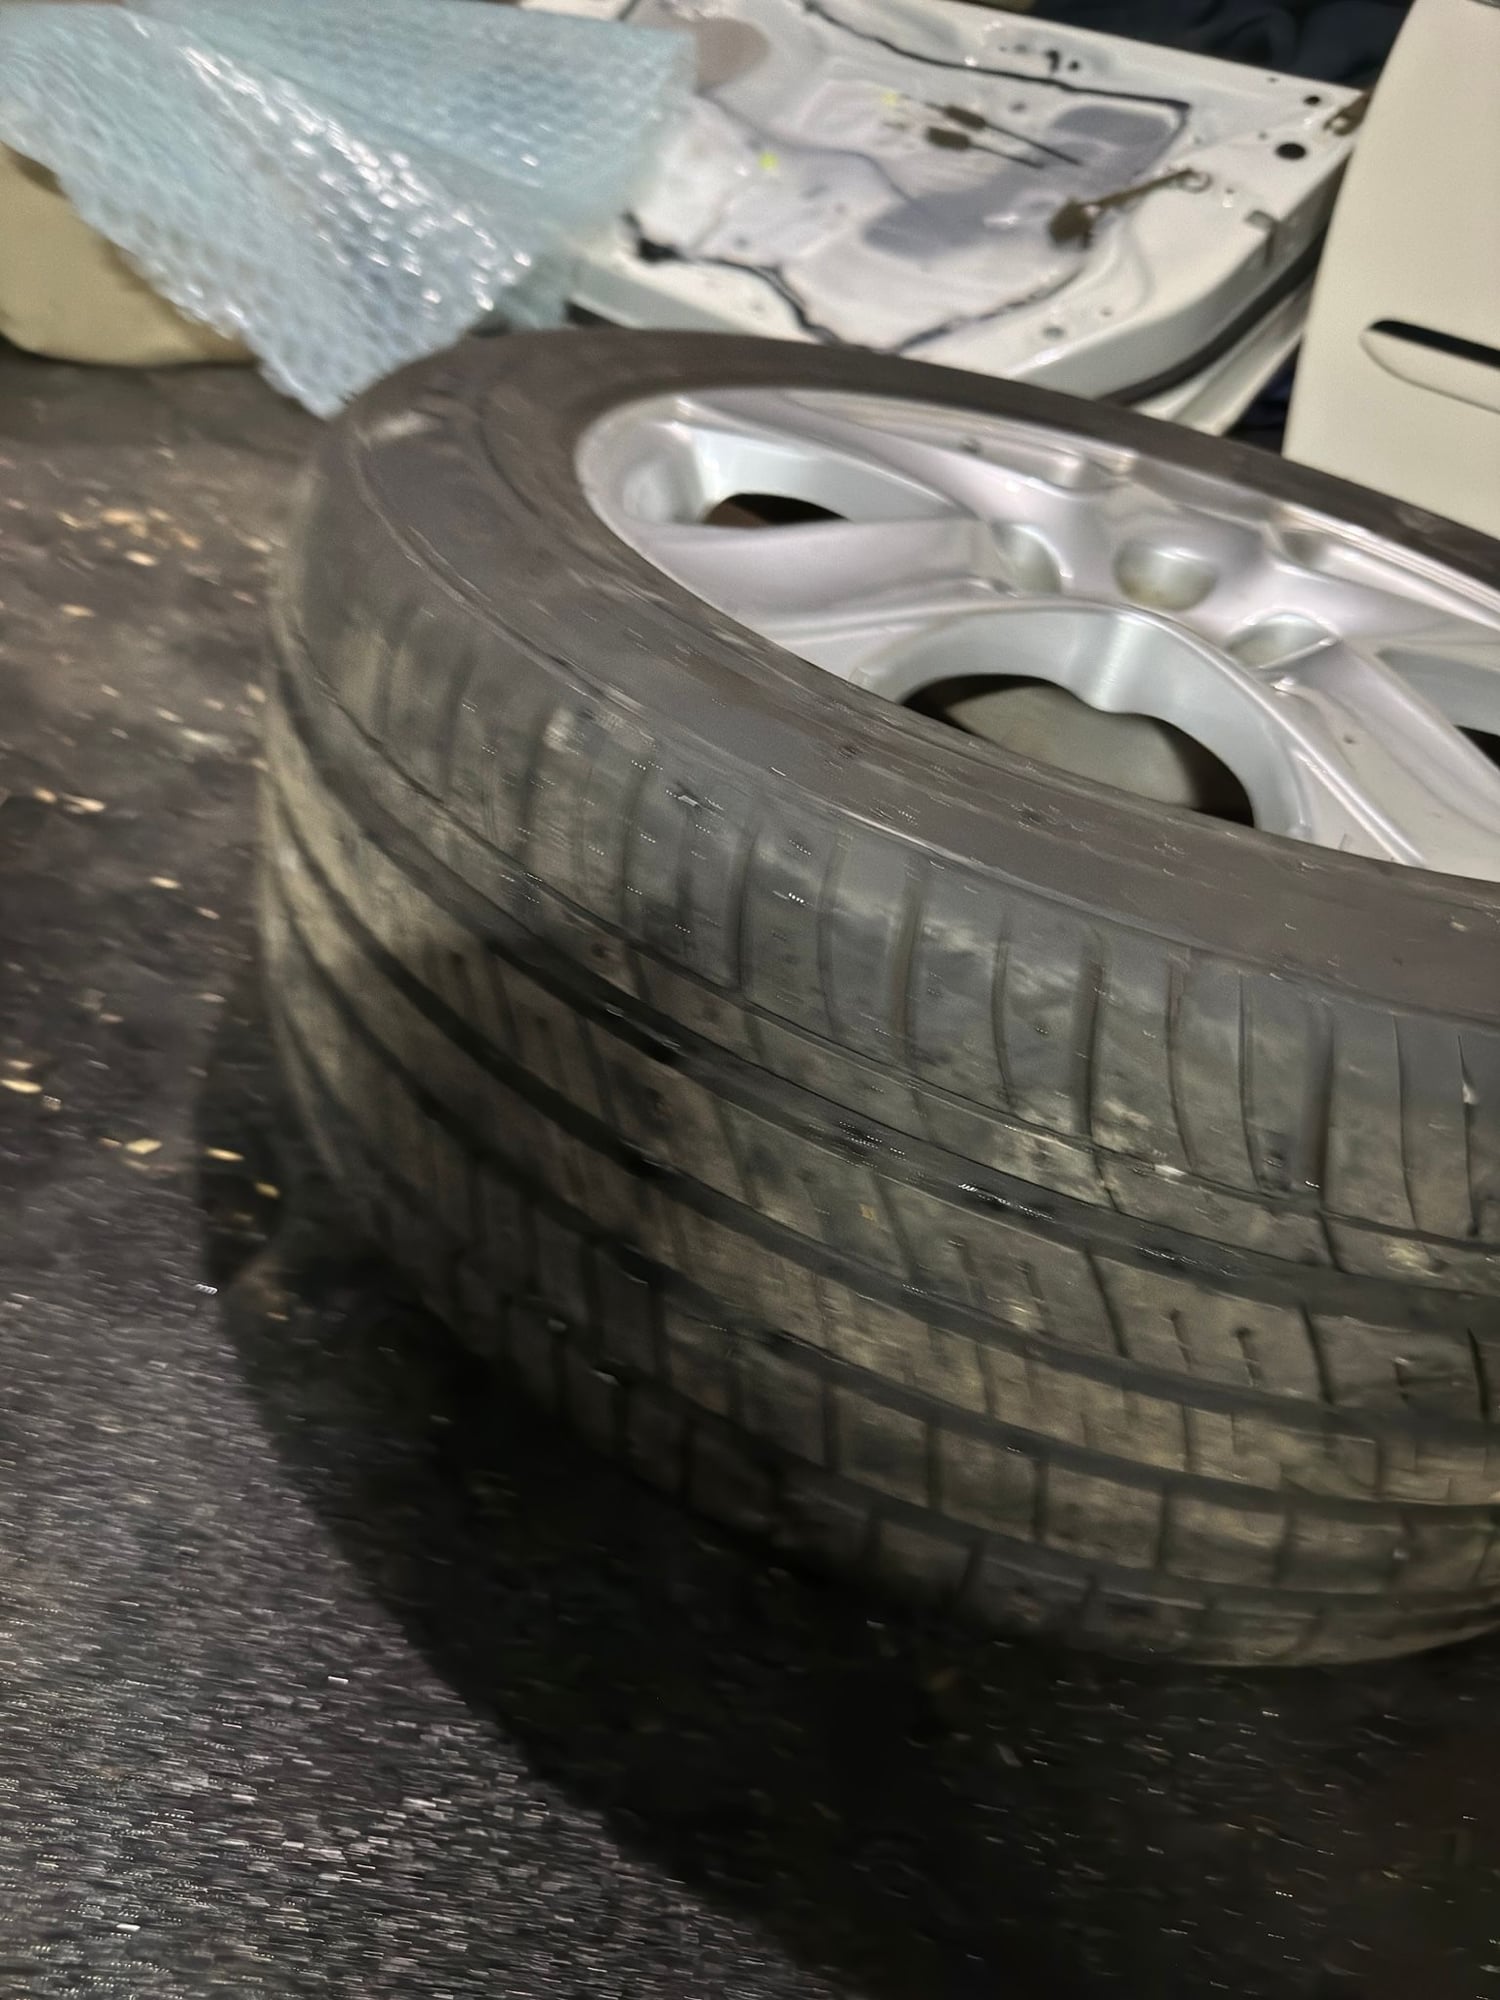 2006 Acura RL - 4 RL stock rims 2 have nice tires on other 2 no tires - Accessories - $100 - Katy, TX 77494, United States